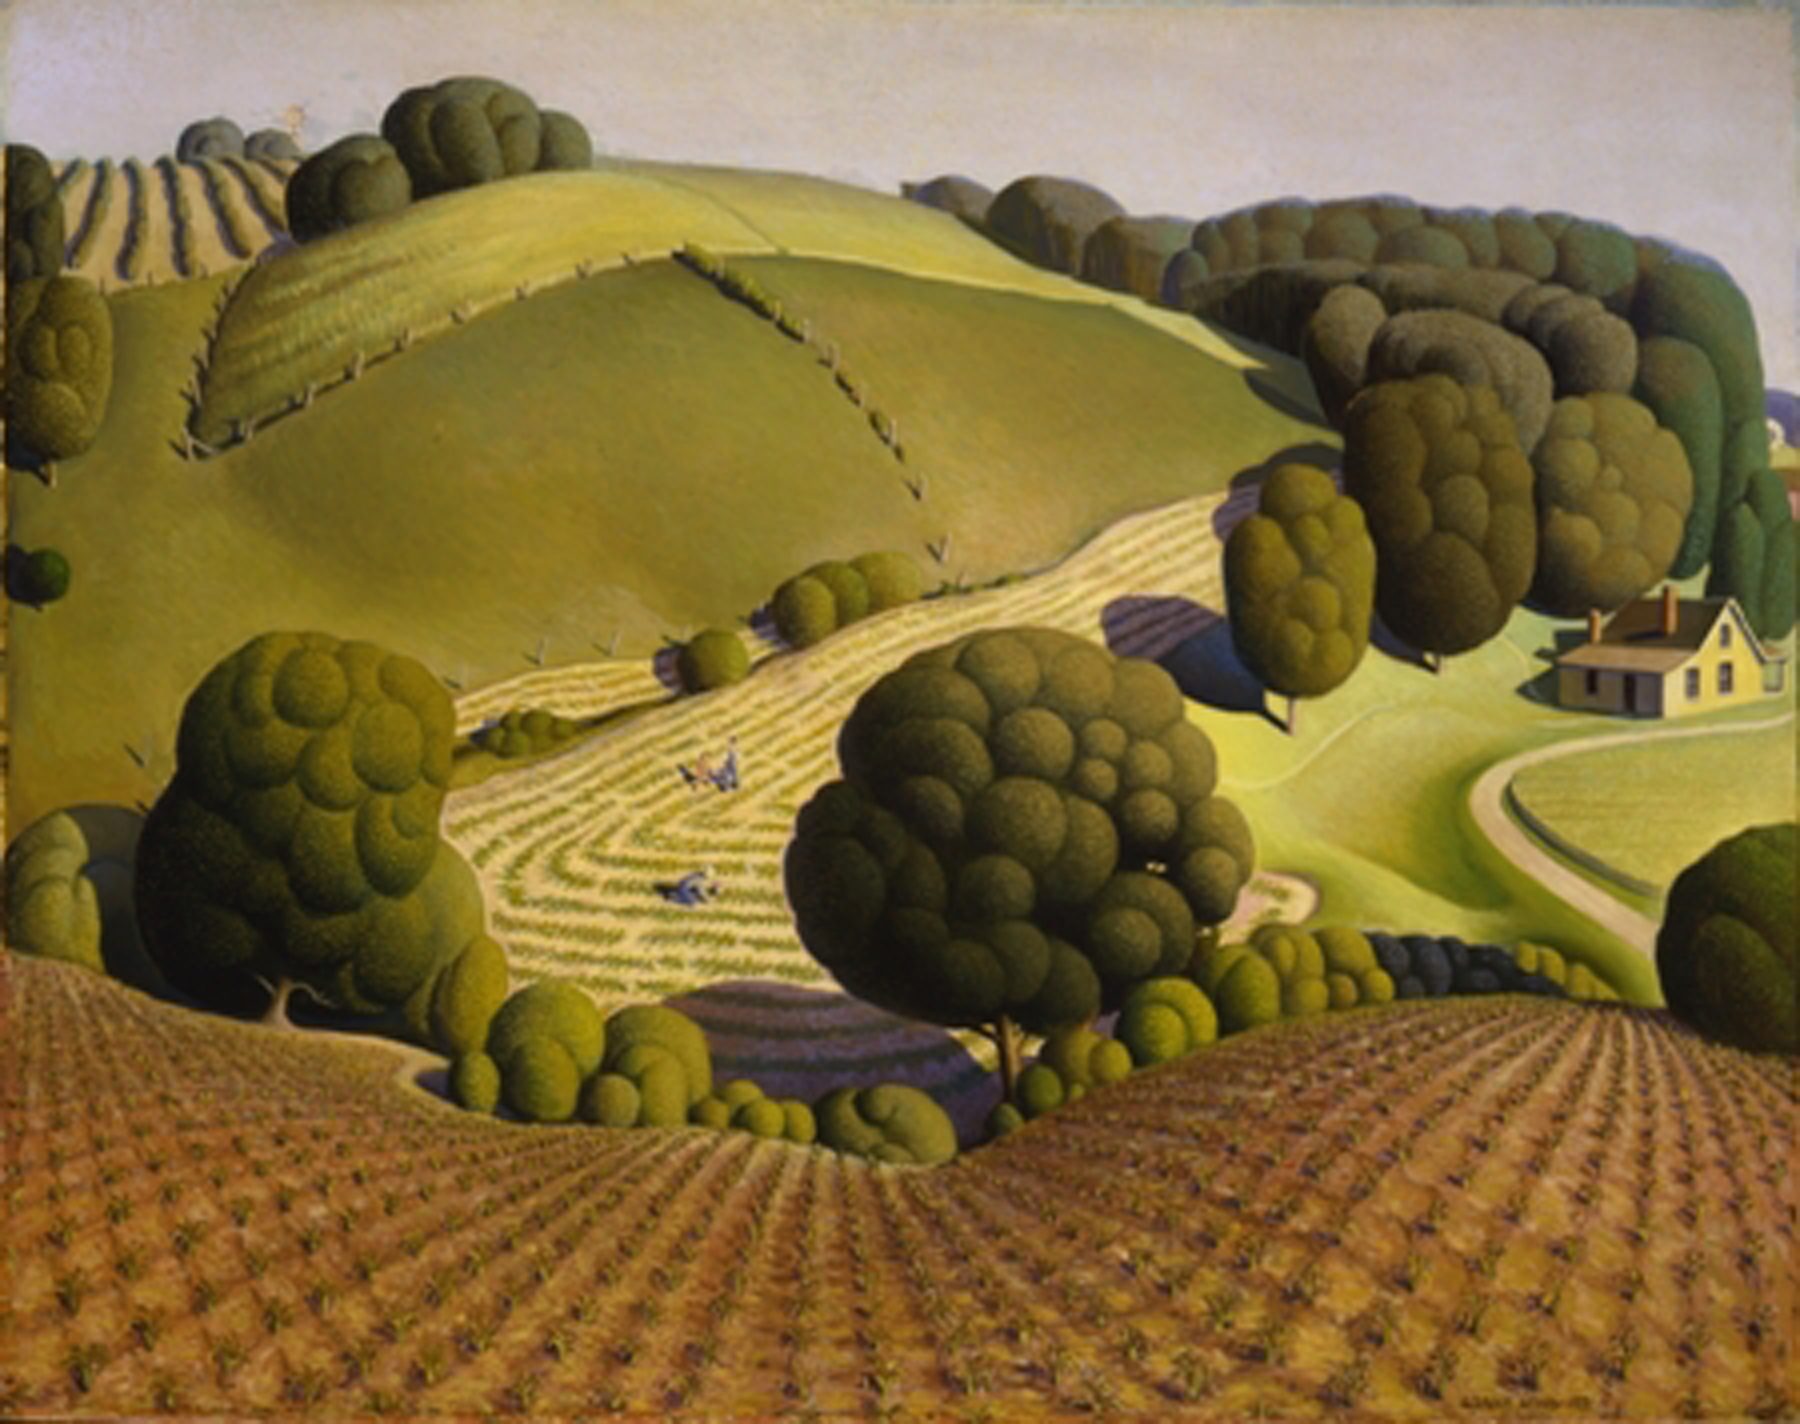 A landscape painting showcasing a lush, rolling countryside scene. In the foreground, young, vibrant green corn stalks are depicted, implying the start of a new growing season. Behind the cornfield, there are two slightly undulating hills dotted with small, mature trees, interspersed with patches of darker green fields. A small white house with a red roof is nestled among the trees in the middle distance, adding a human touch to this idyllic rural landscape.